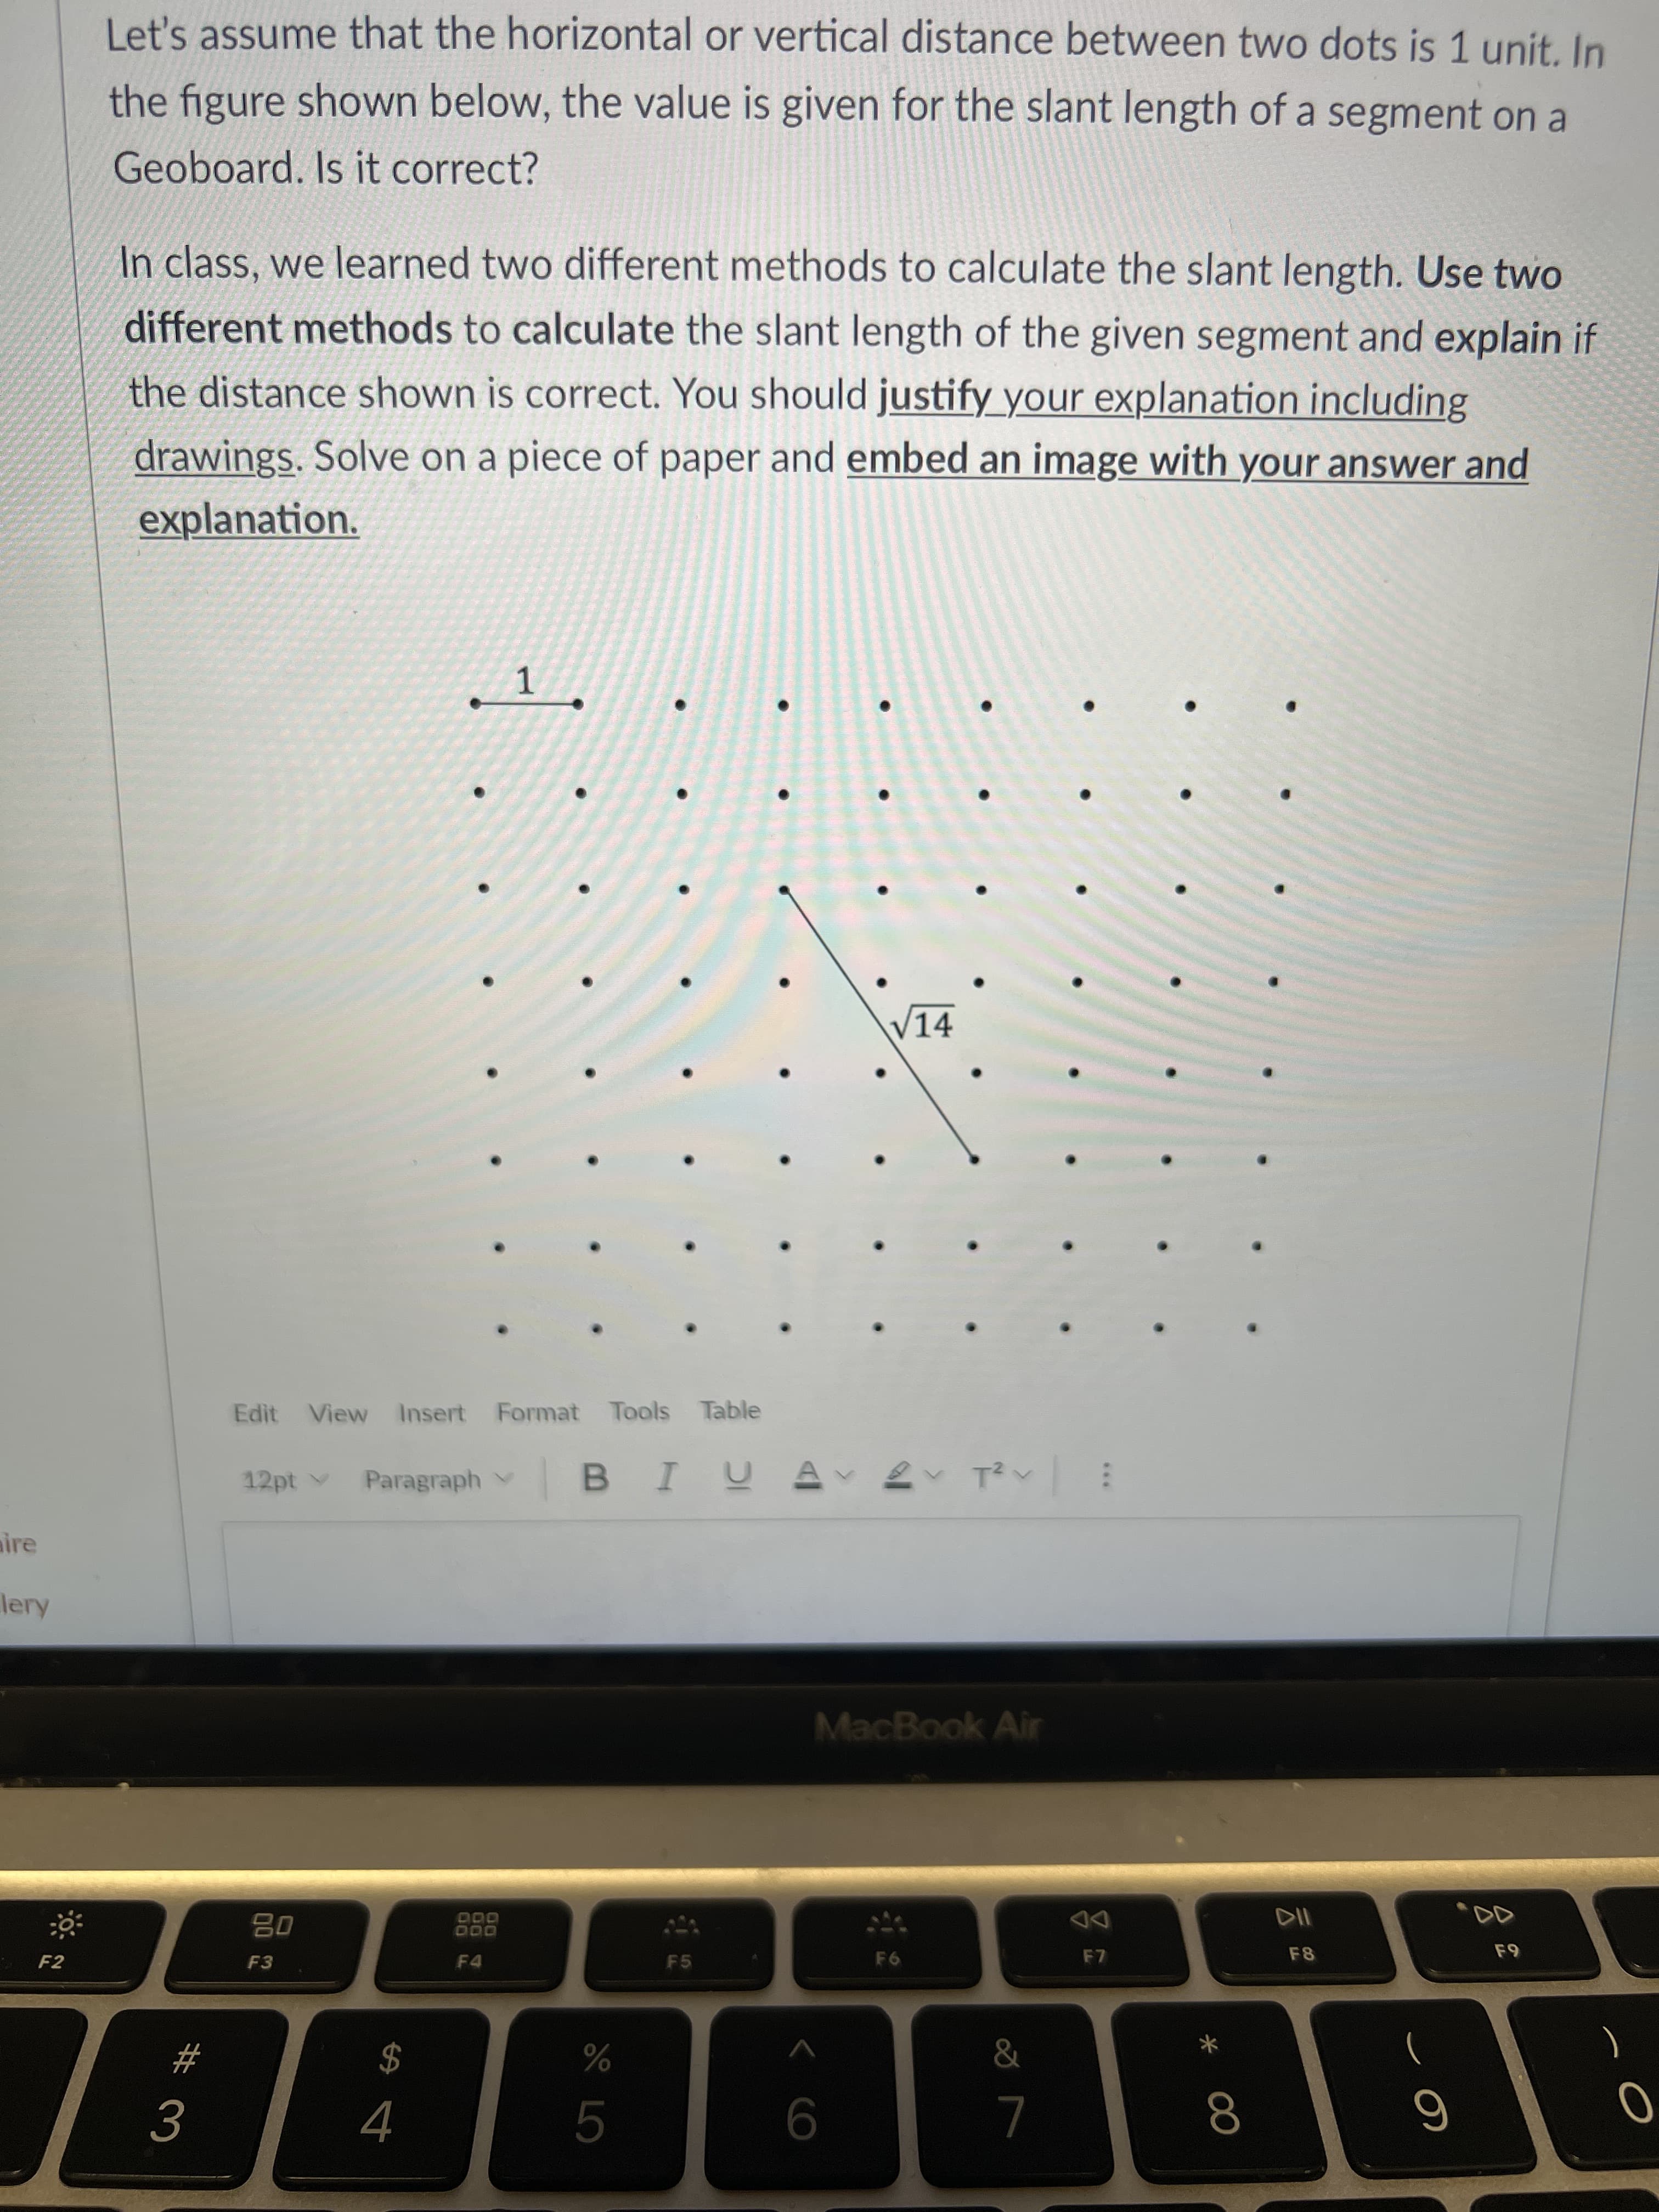 00
Let's assume that the horizontal or vertical distance between two dots is 1 unit. In
the figure shown below, the value is given for the slant length of a segment on a
Geoboard. Is it correct?
In class, we learned two different methods to calculate the slant length. Use two
different methods to calculate the slant length of the given segment and explain if
the distance shown is correct. You should justify_your explanation including
drawings. Solve on a piece of paper and embed an image with your answer and
explanation.
V14
Edit View Insert Format Tools Table
12pt v
Paragraph v
: へ へ
aire
lery
MacBook Air
DD
F7
000
000
F8
F2
F3
F4
F5
%
)
#
$
9
